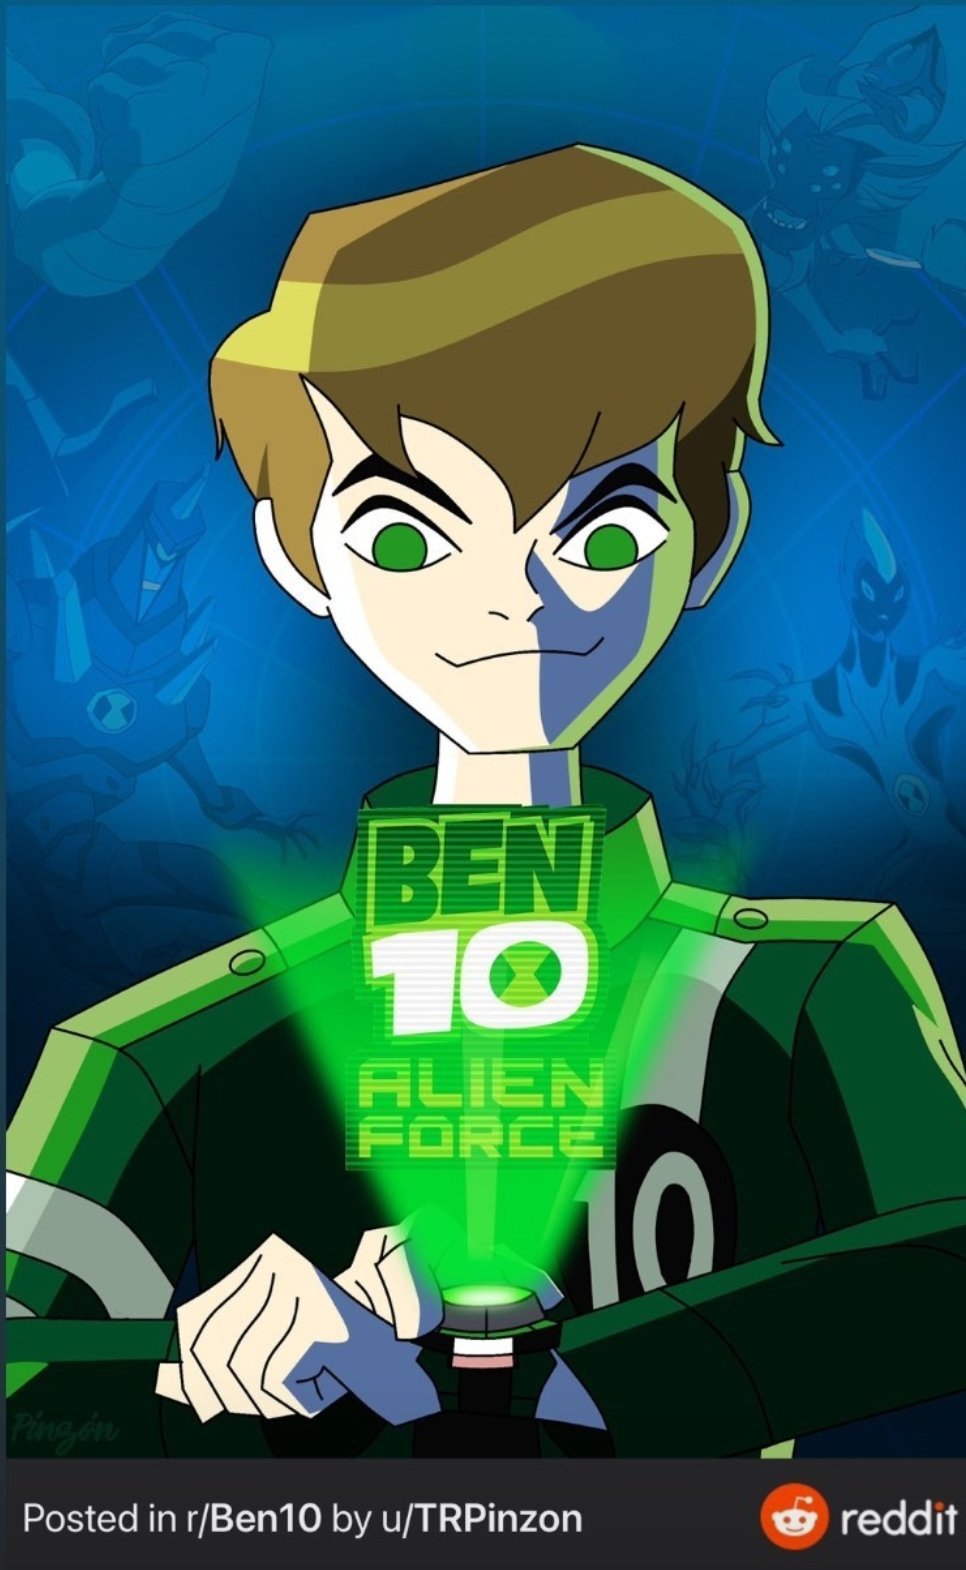 A.S.K. Air Ben 10: Alien Force was in the Omniverse style